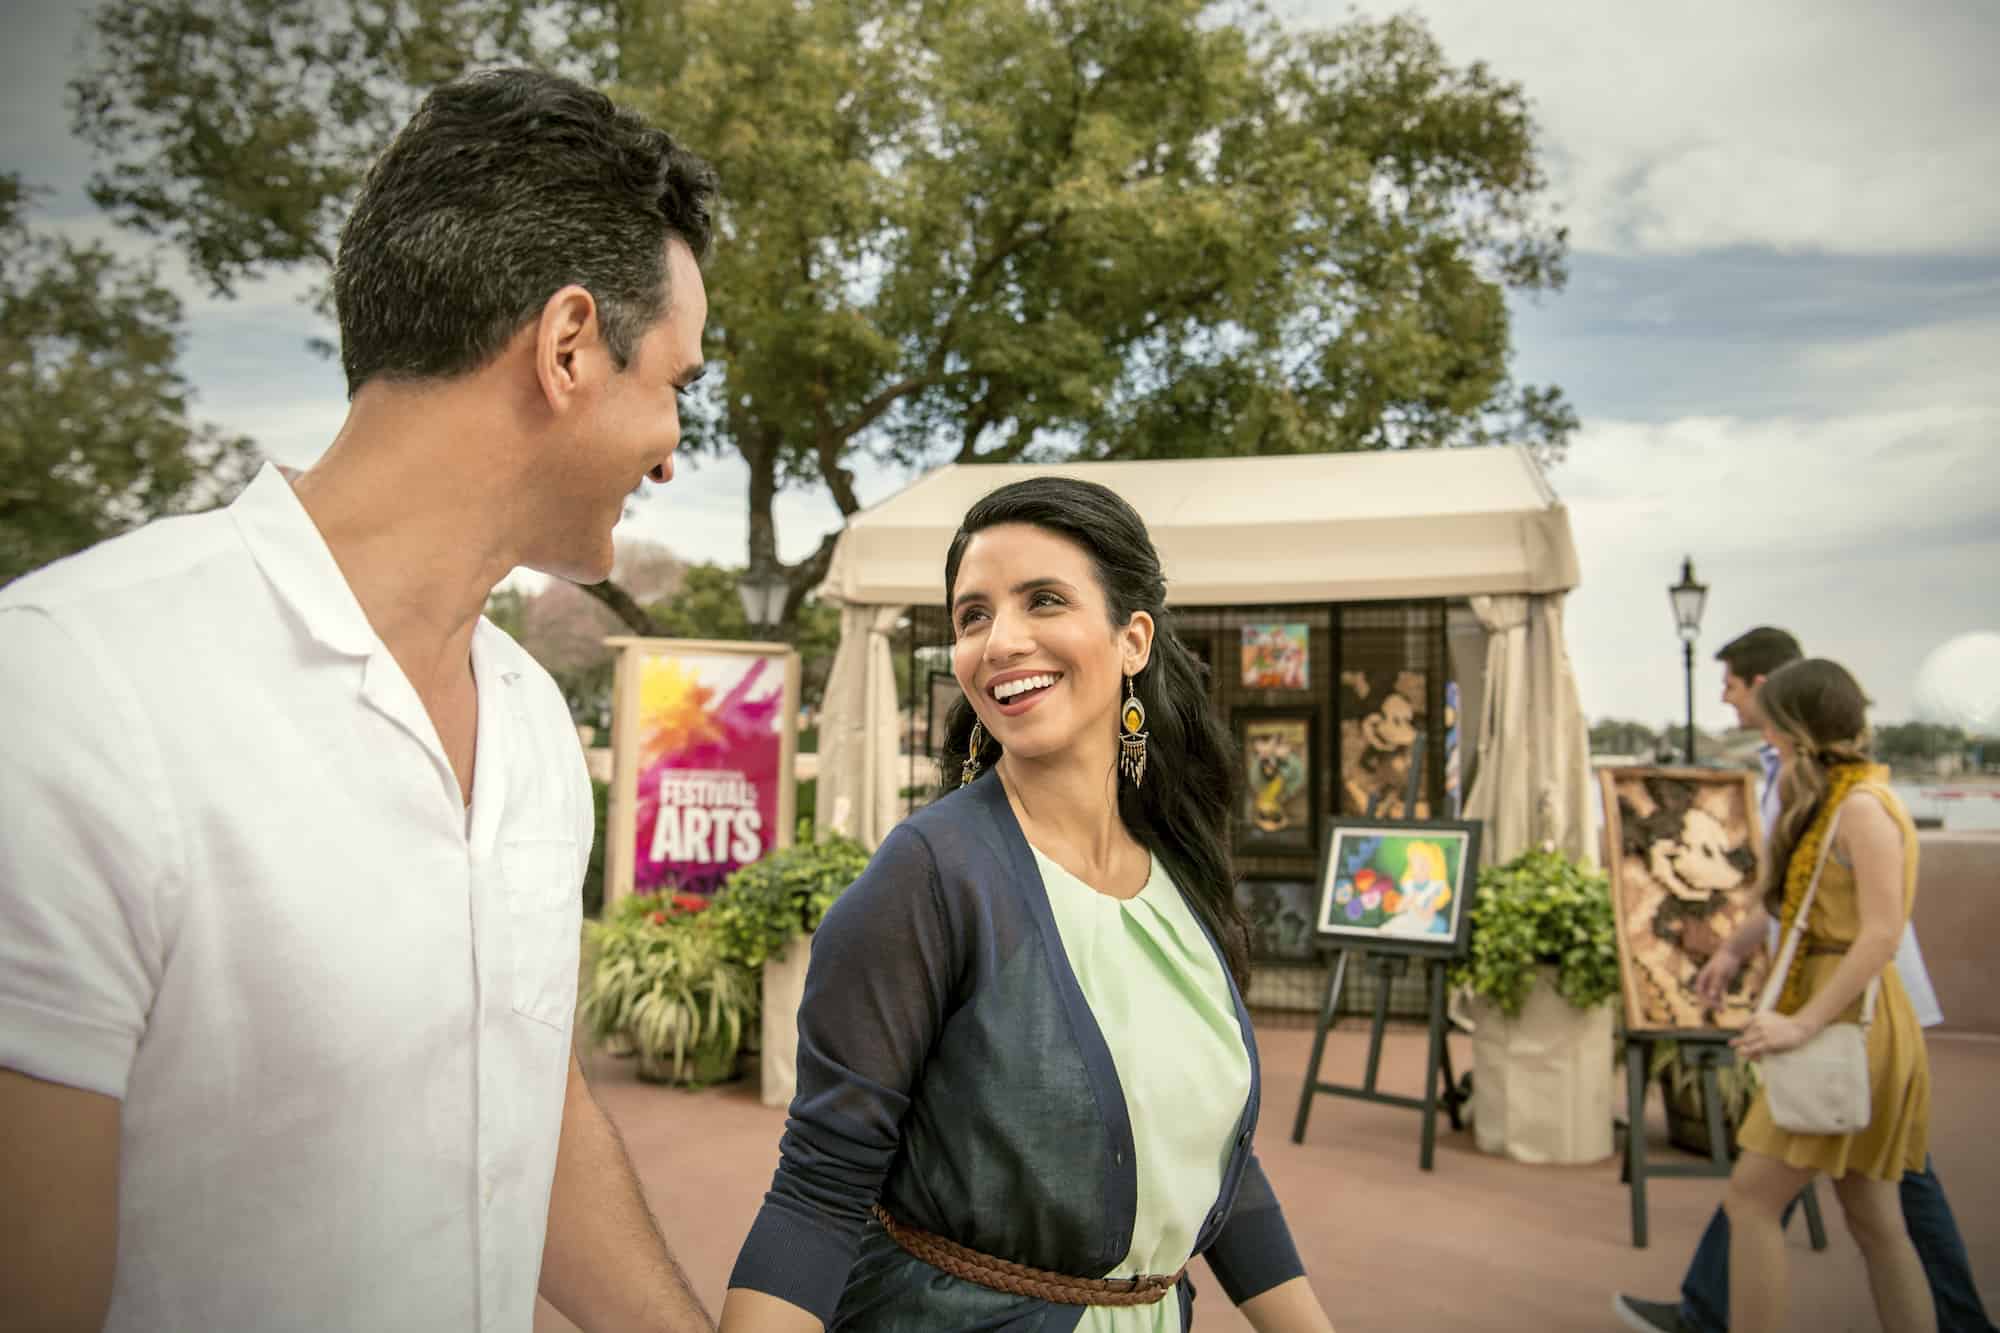 EPCOT International Festival of the Arts 2022 event schedule